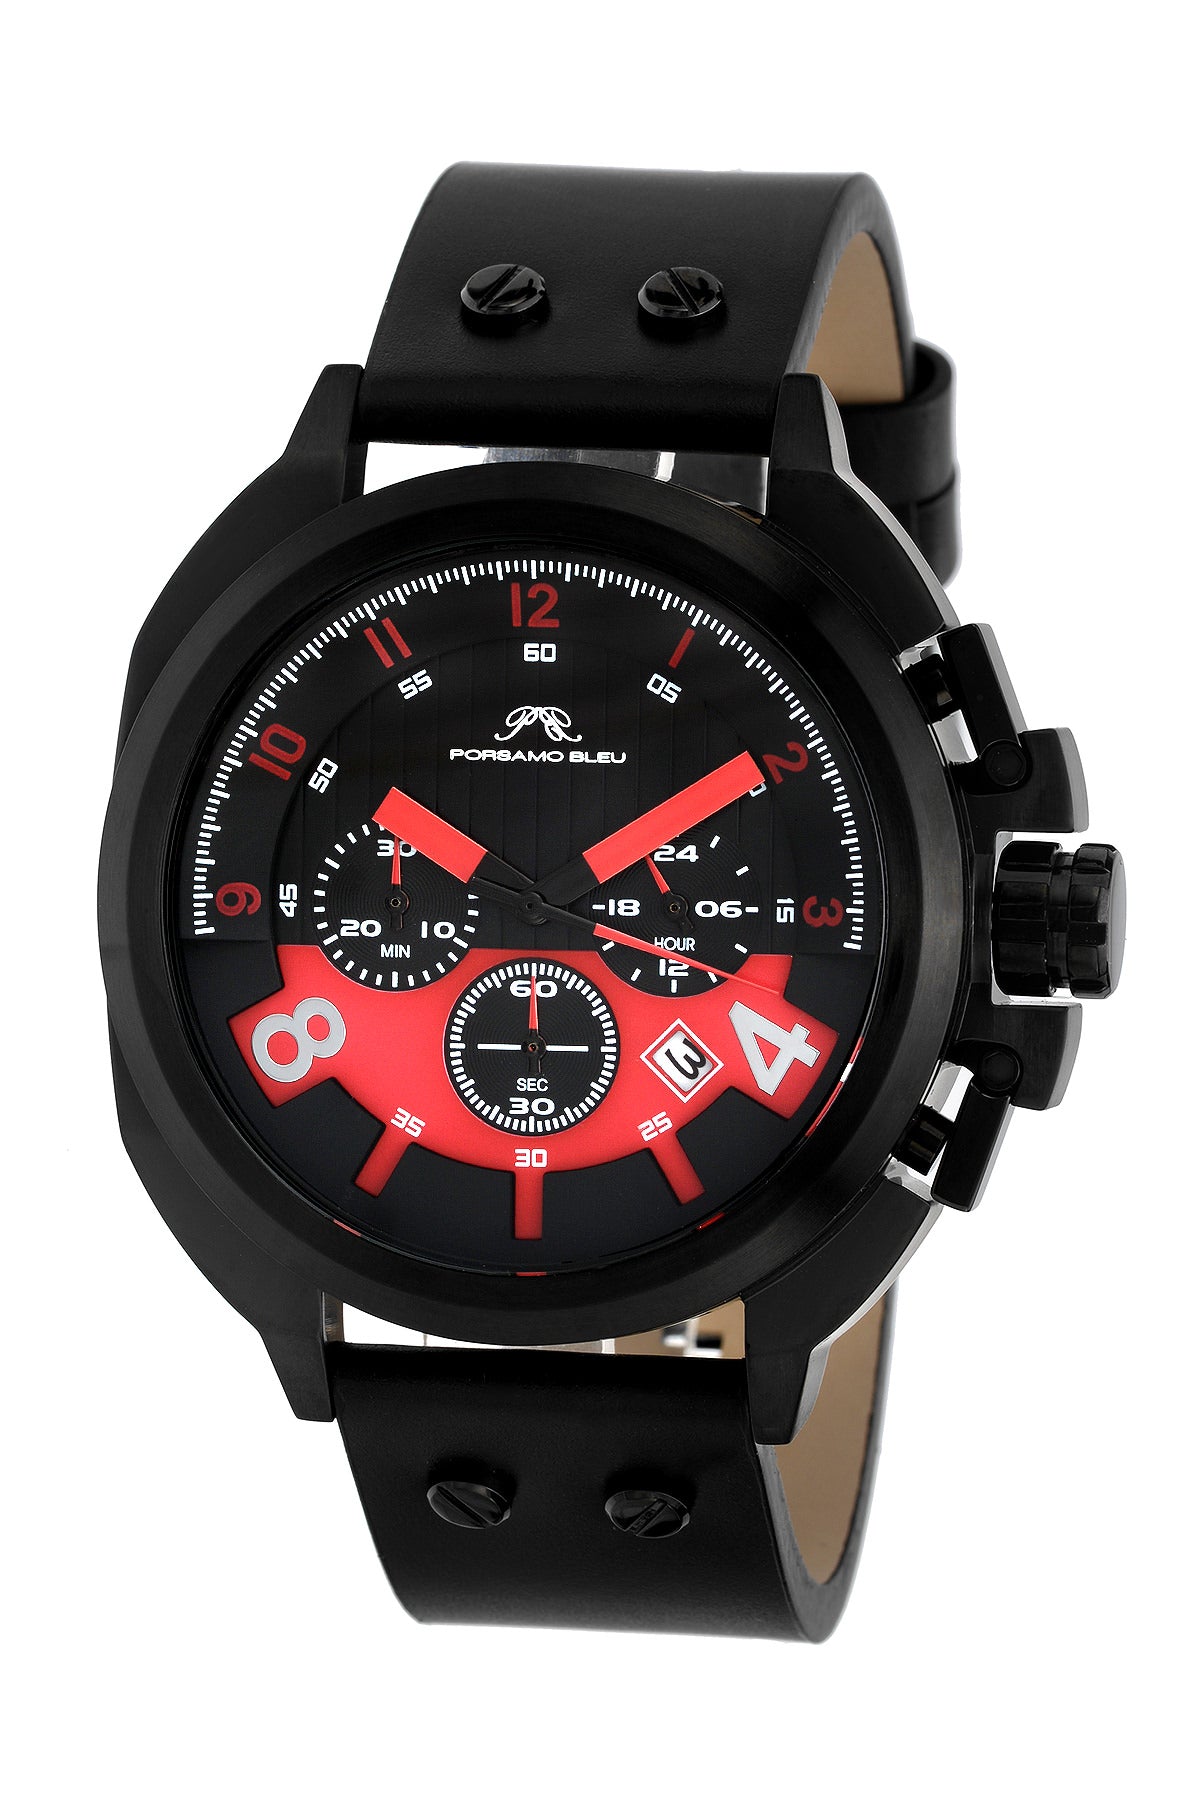 Porsamo Bleu Connor luxury chronograph men's watch, genuine leather band, black, red 421BCOL